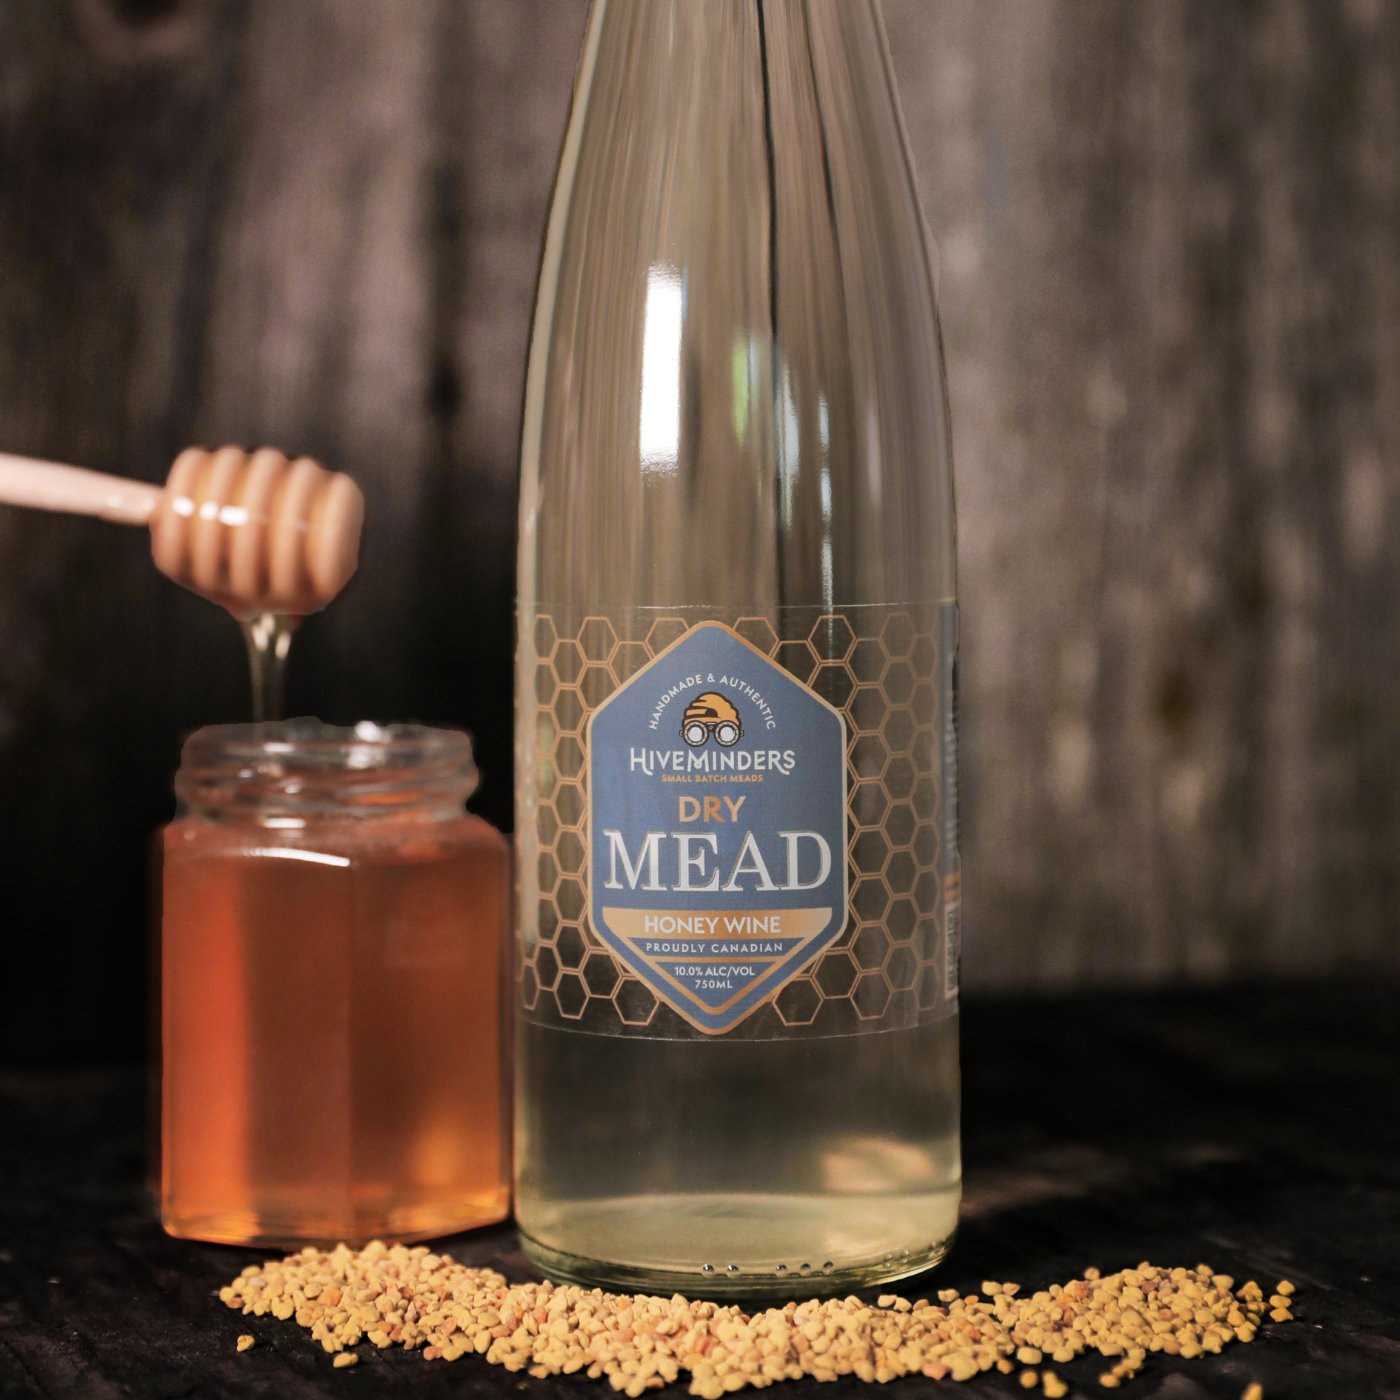 Image of rhubarb mead being poured into a tall wine glass.